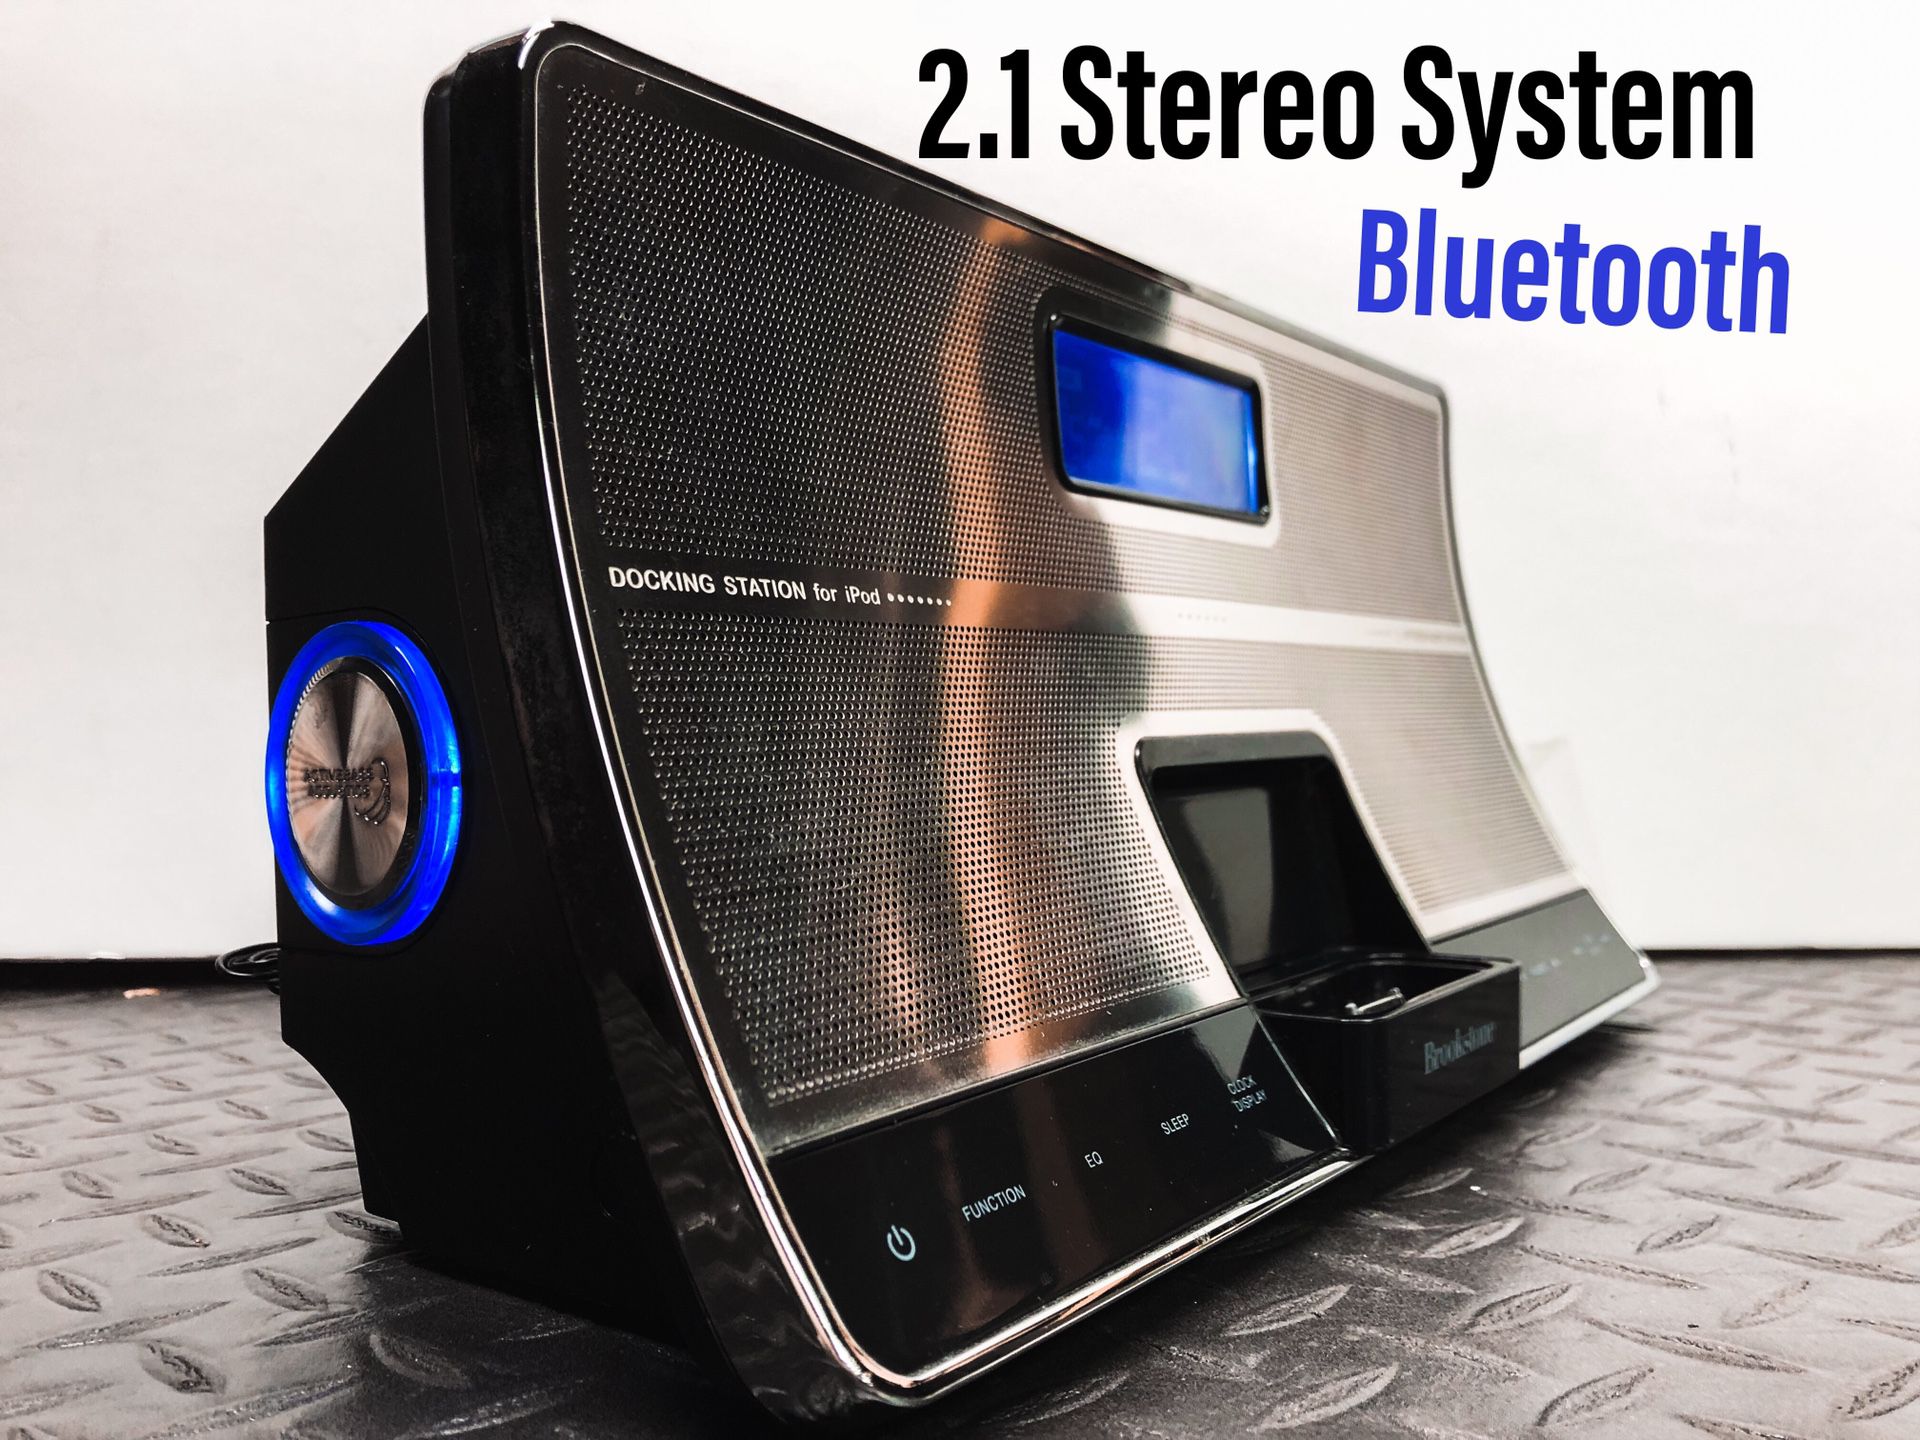 2.1 Stereo System with Bluetooth